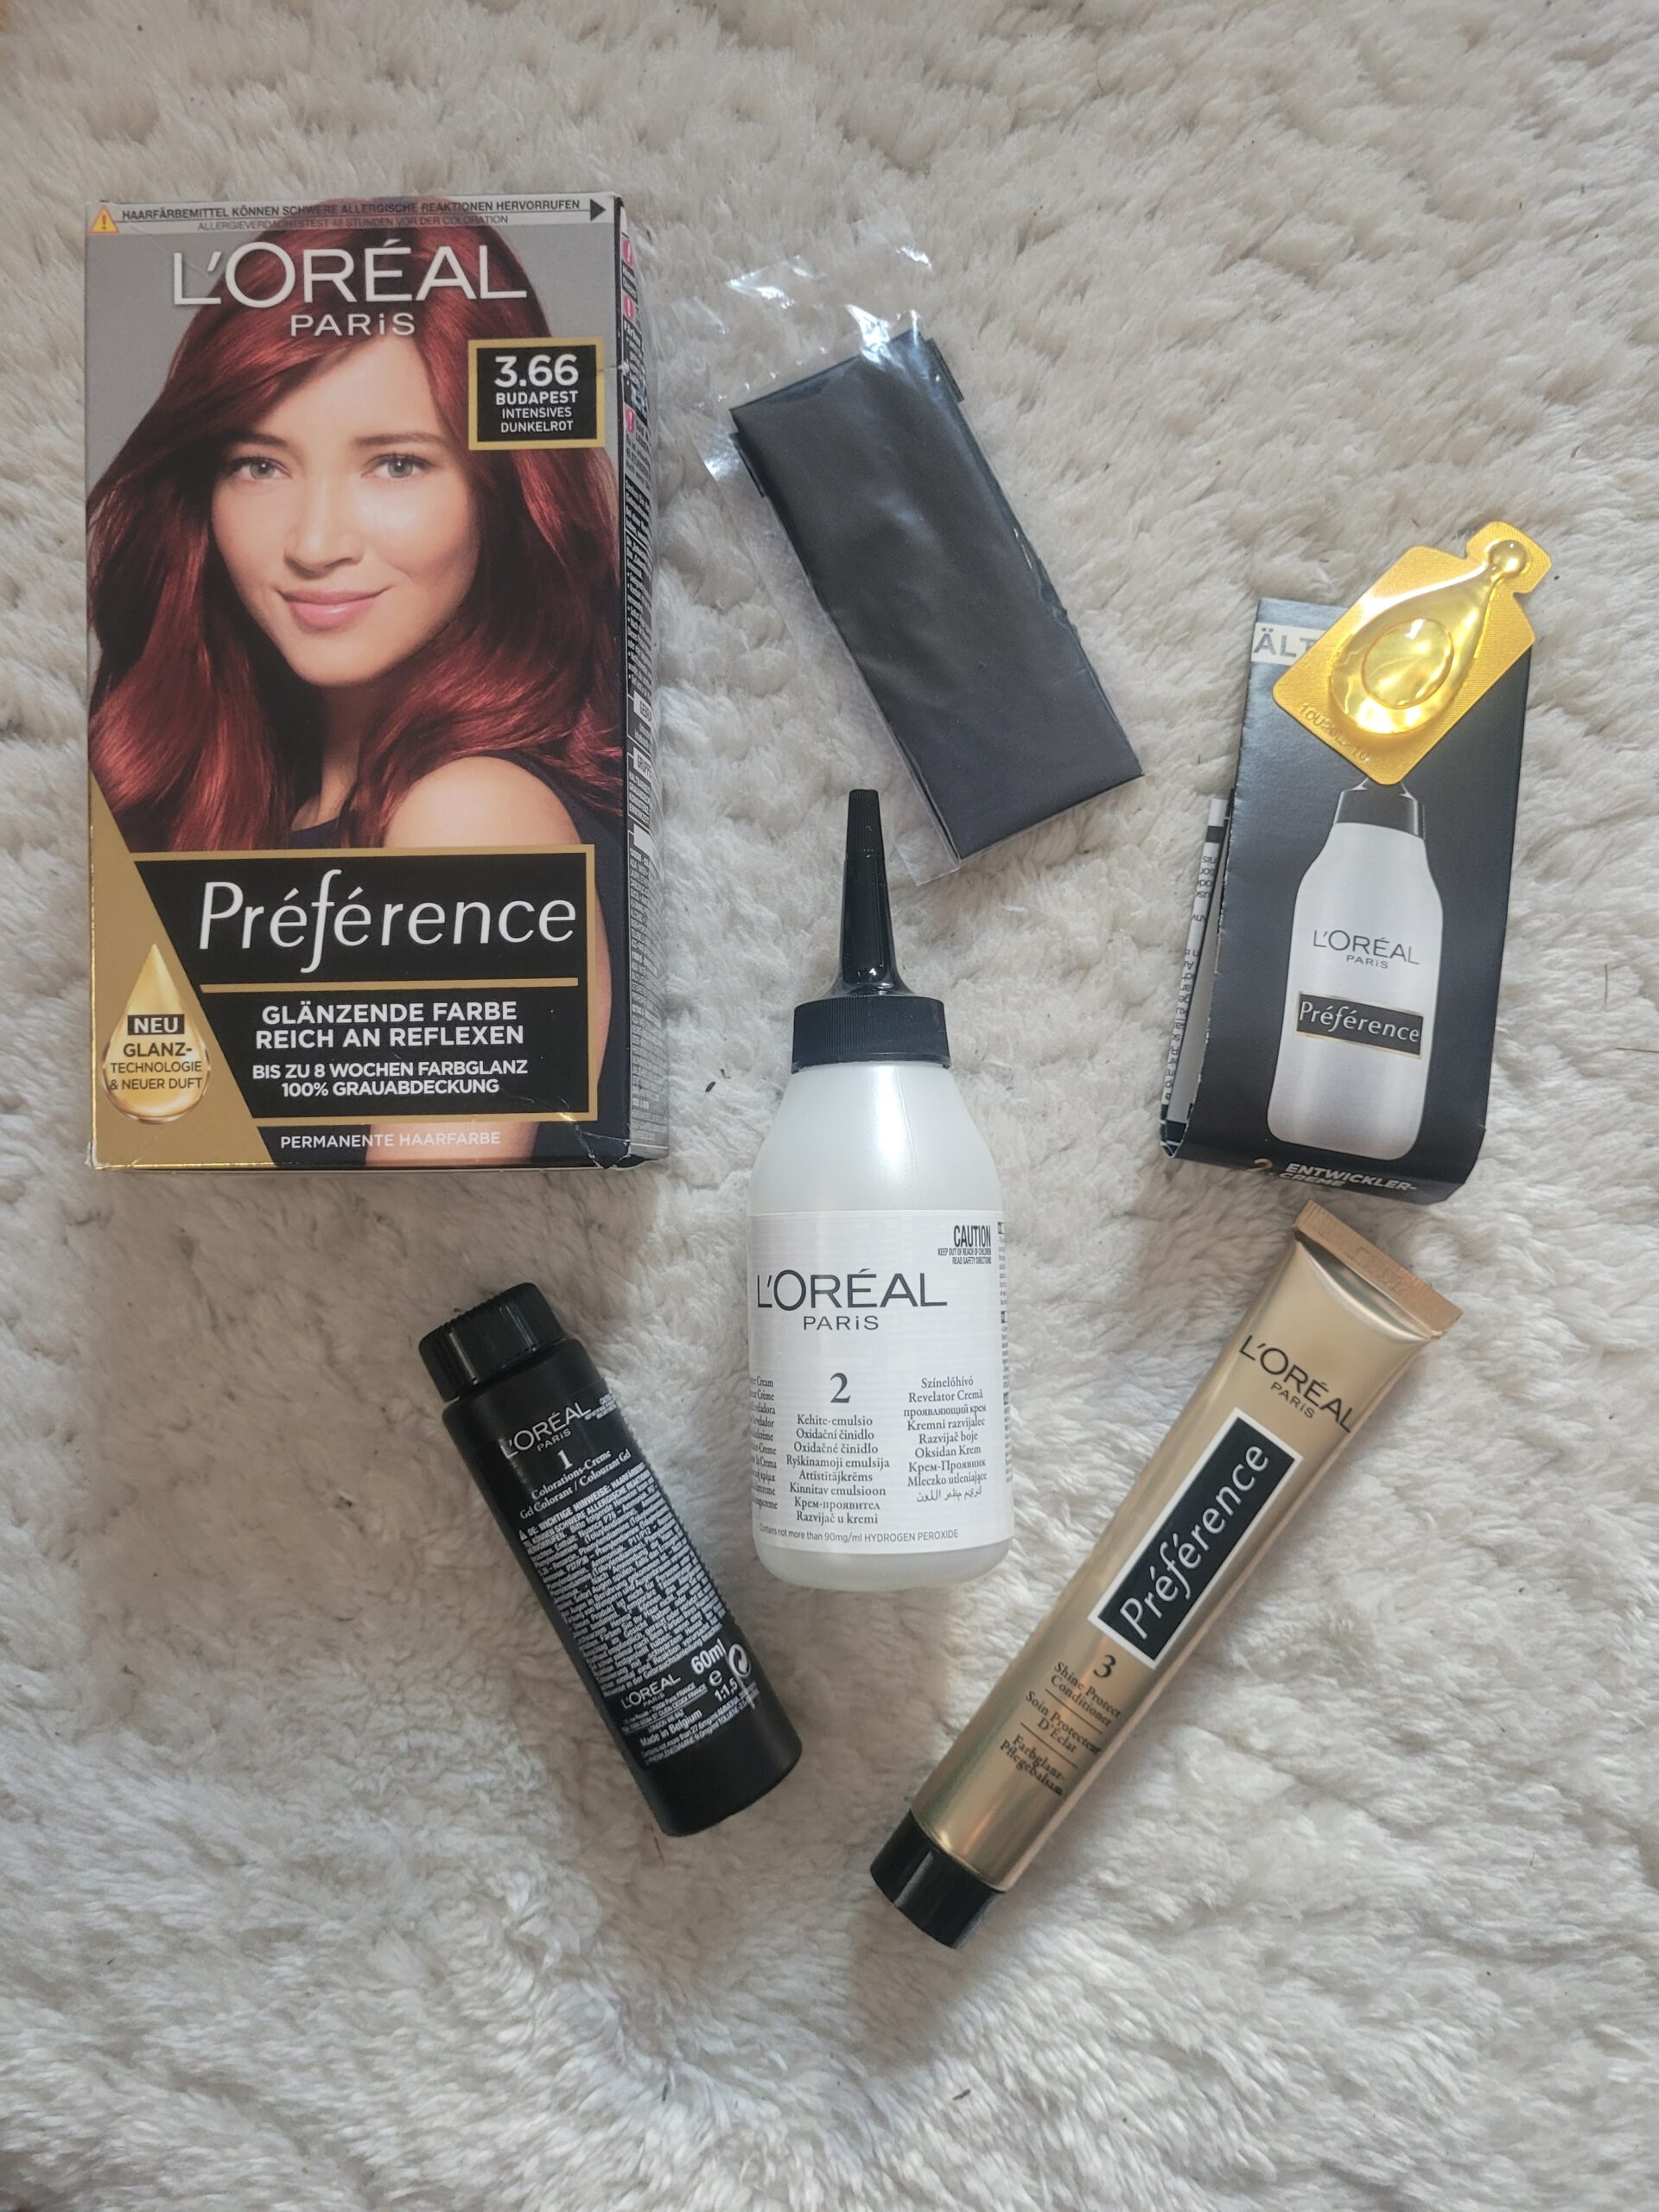 You are currently viewing L’OREAL Paris Préférence – Budapest intensives Dunkelrot<span class='yasr-stars-title-average'><div class='yasr-stars-title yasr-rater-stars'
                           id='yasr-overall-rating-rater-6c6db4359cca5'
                           data-rating='5'
                           data-rater-starsize='16'>
                       </div></span>